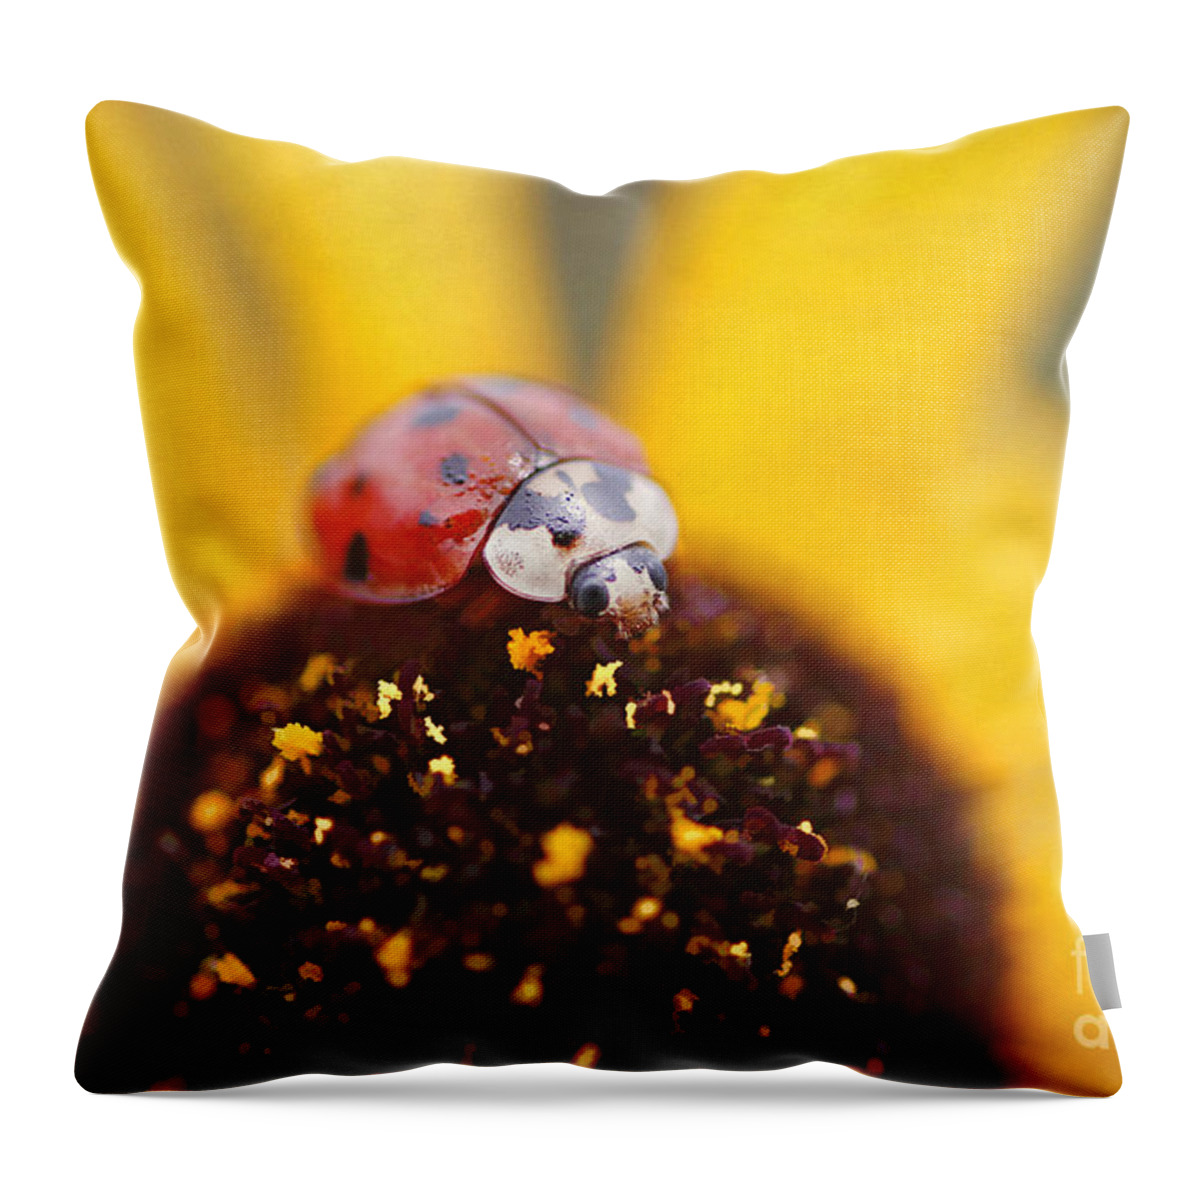 Black Eyed Susan Throw Pillow featuring the photograph Sitting Pretty by Darren Fisher